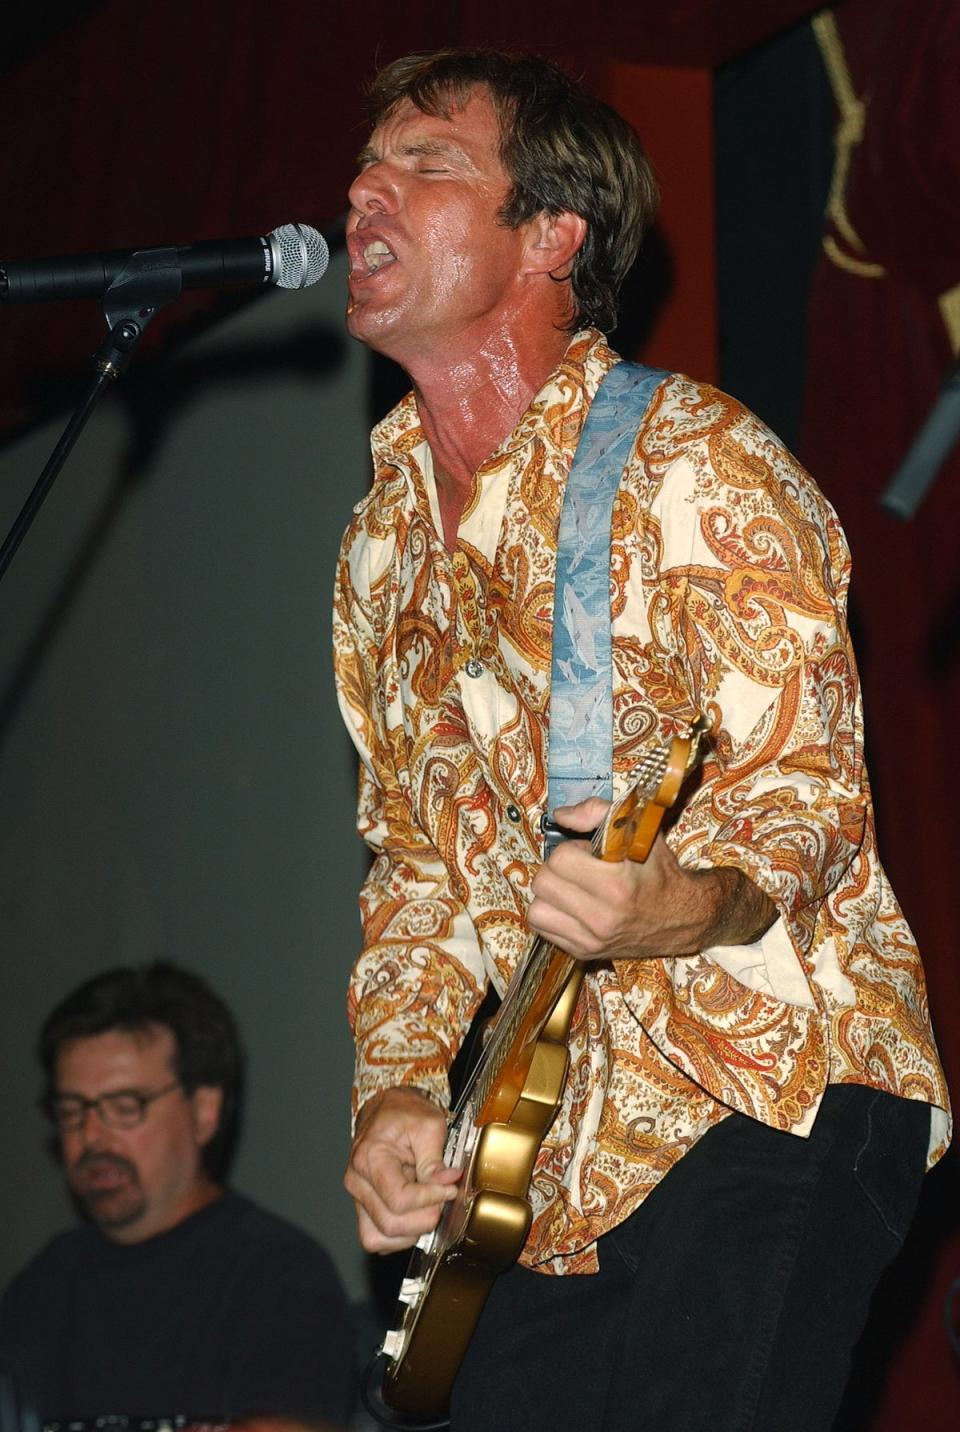 Quaid, who has been singing professionally for years, performs live with his band The Sharks August 1, 2002 in New York City (Getty Images)